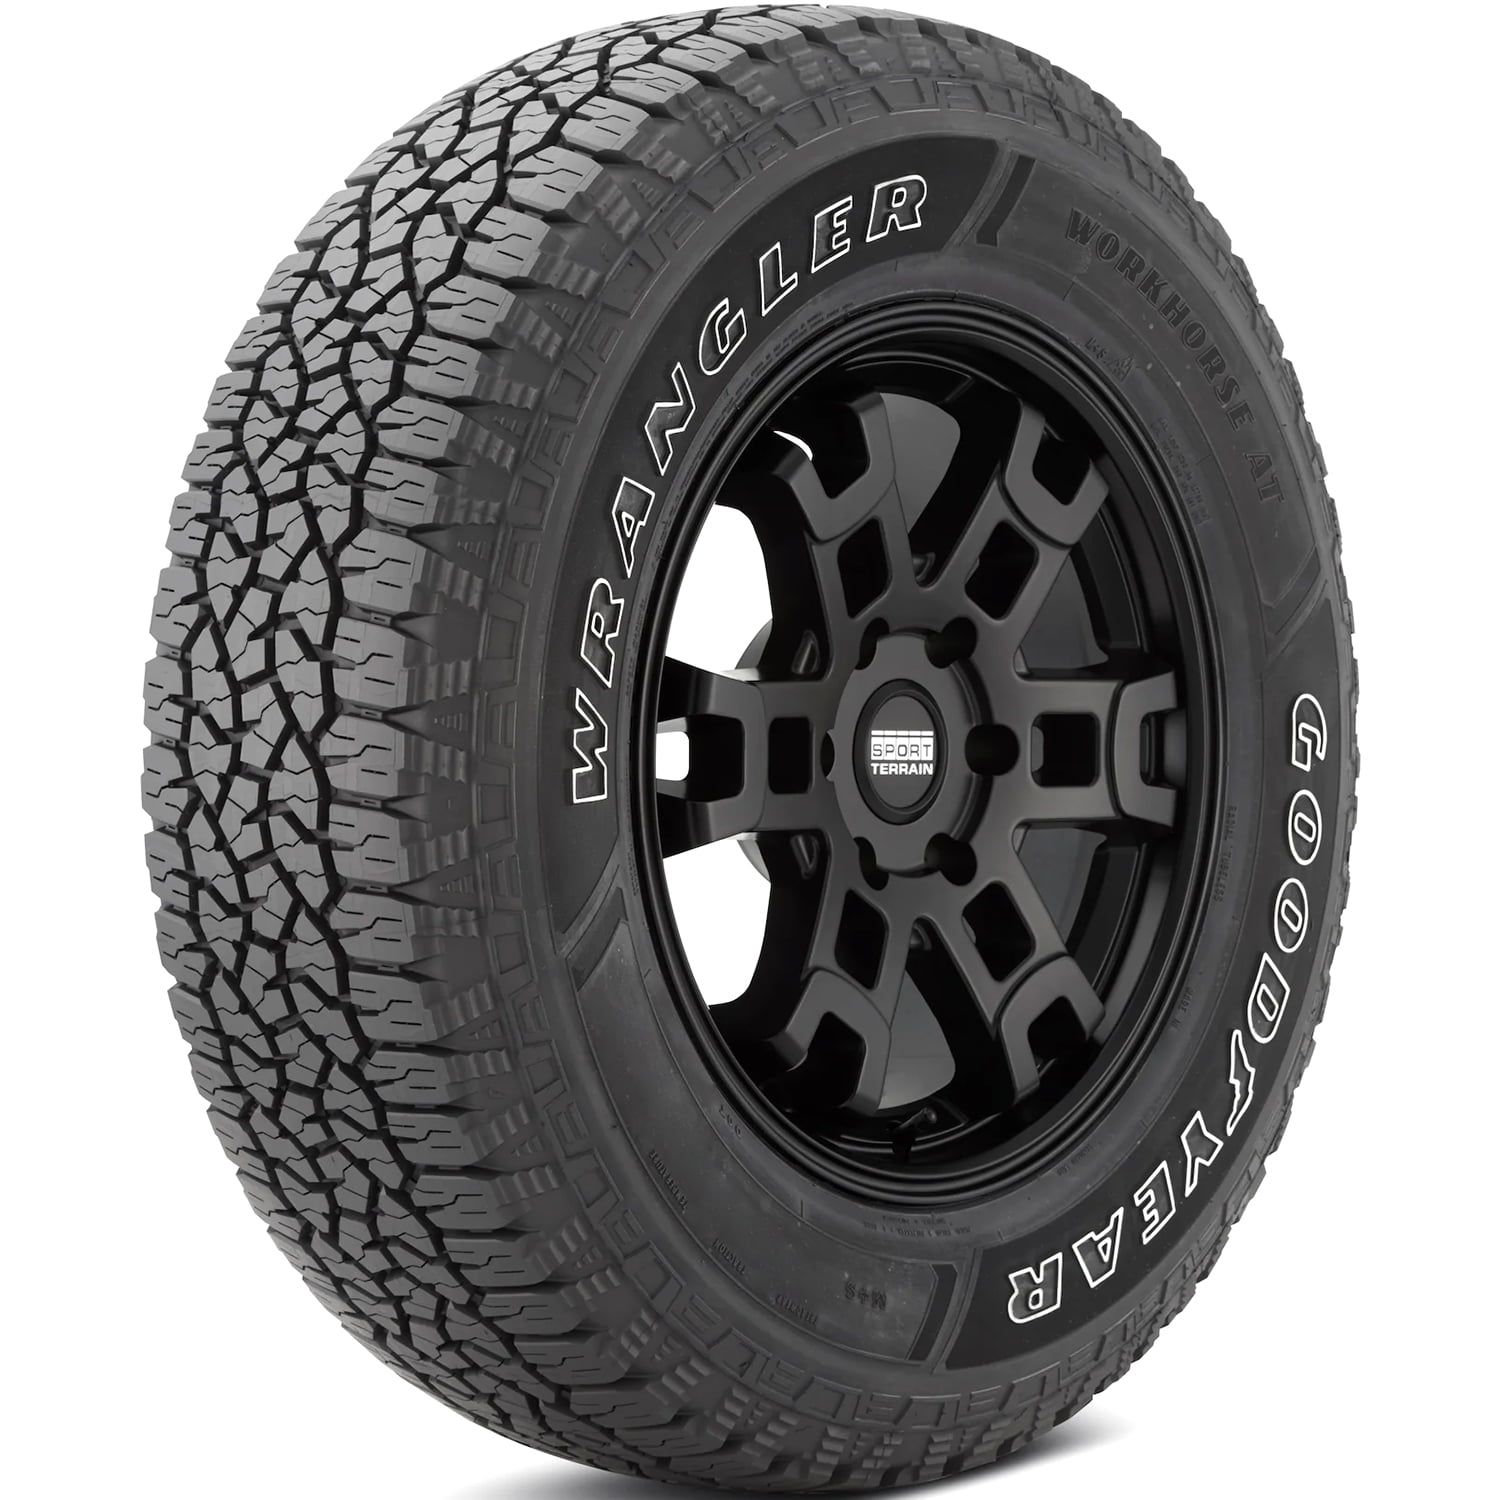 Goodyear Wrangler Workhorse AT LT 285/70R17 Load E 10 Ply All Terrain Tire  